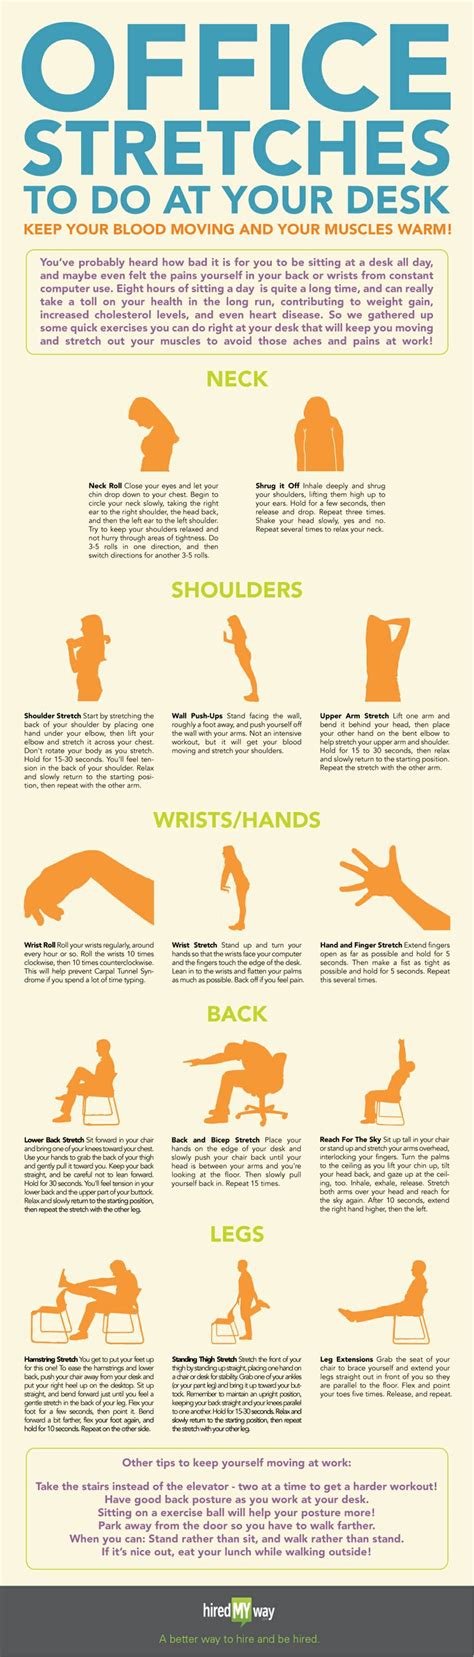 [INFOGRAPHIC] Office Stretches for Chronic Back Pain - Comprehensive ...